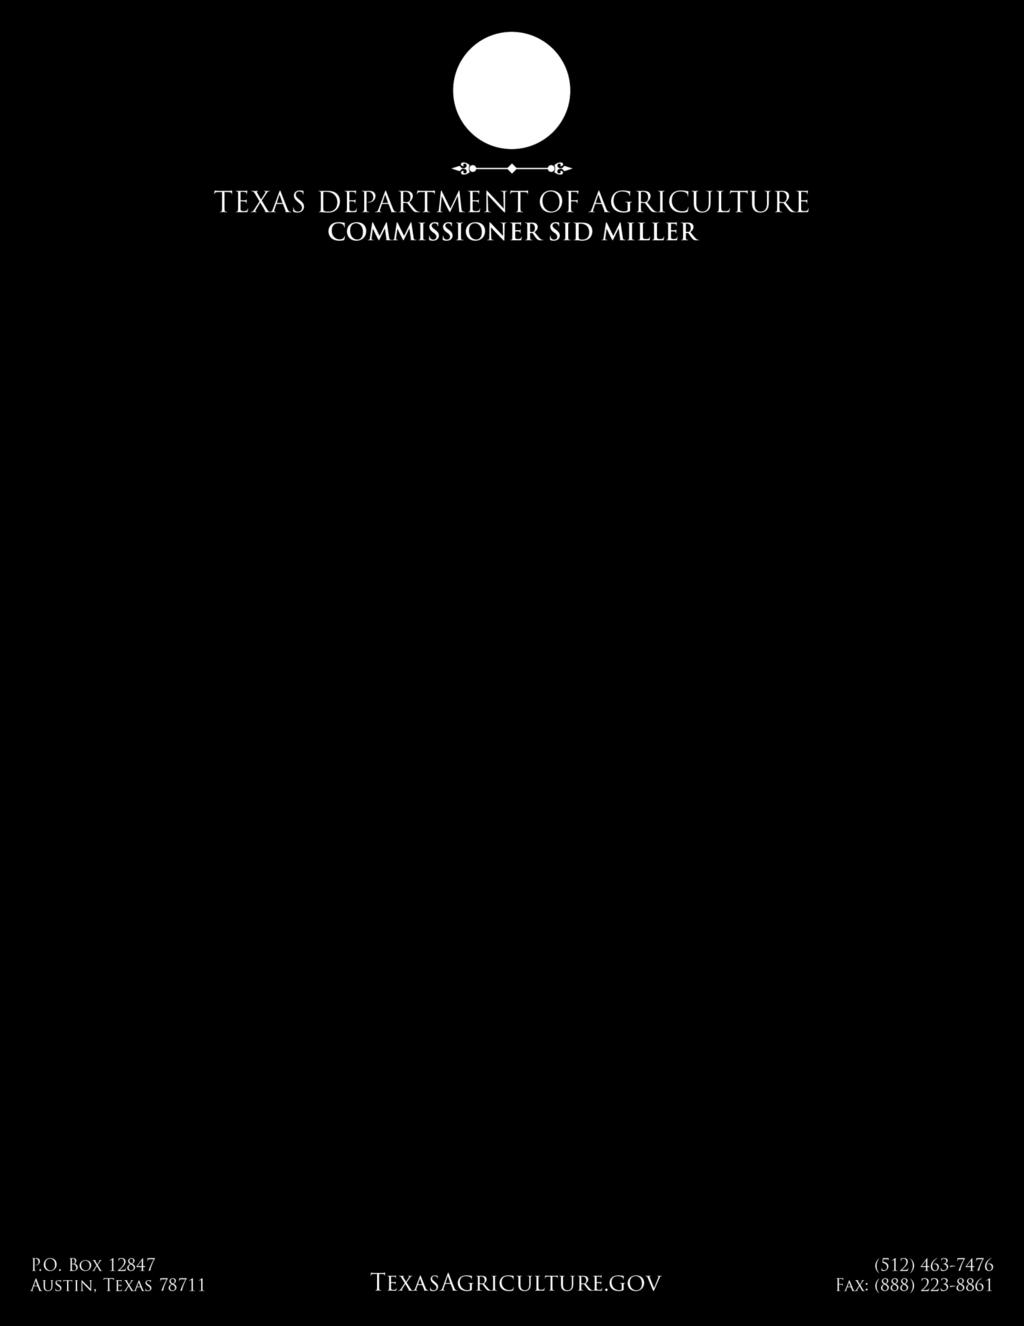 January 14, 2015 To Whom It May Concern: The Texas Department of Agriculture (TDA), Food and Nutrition (F&N) requires all new nongovernmental organizations applying to participate as a sponsor in the